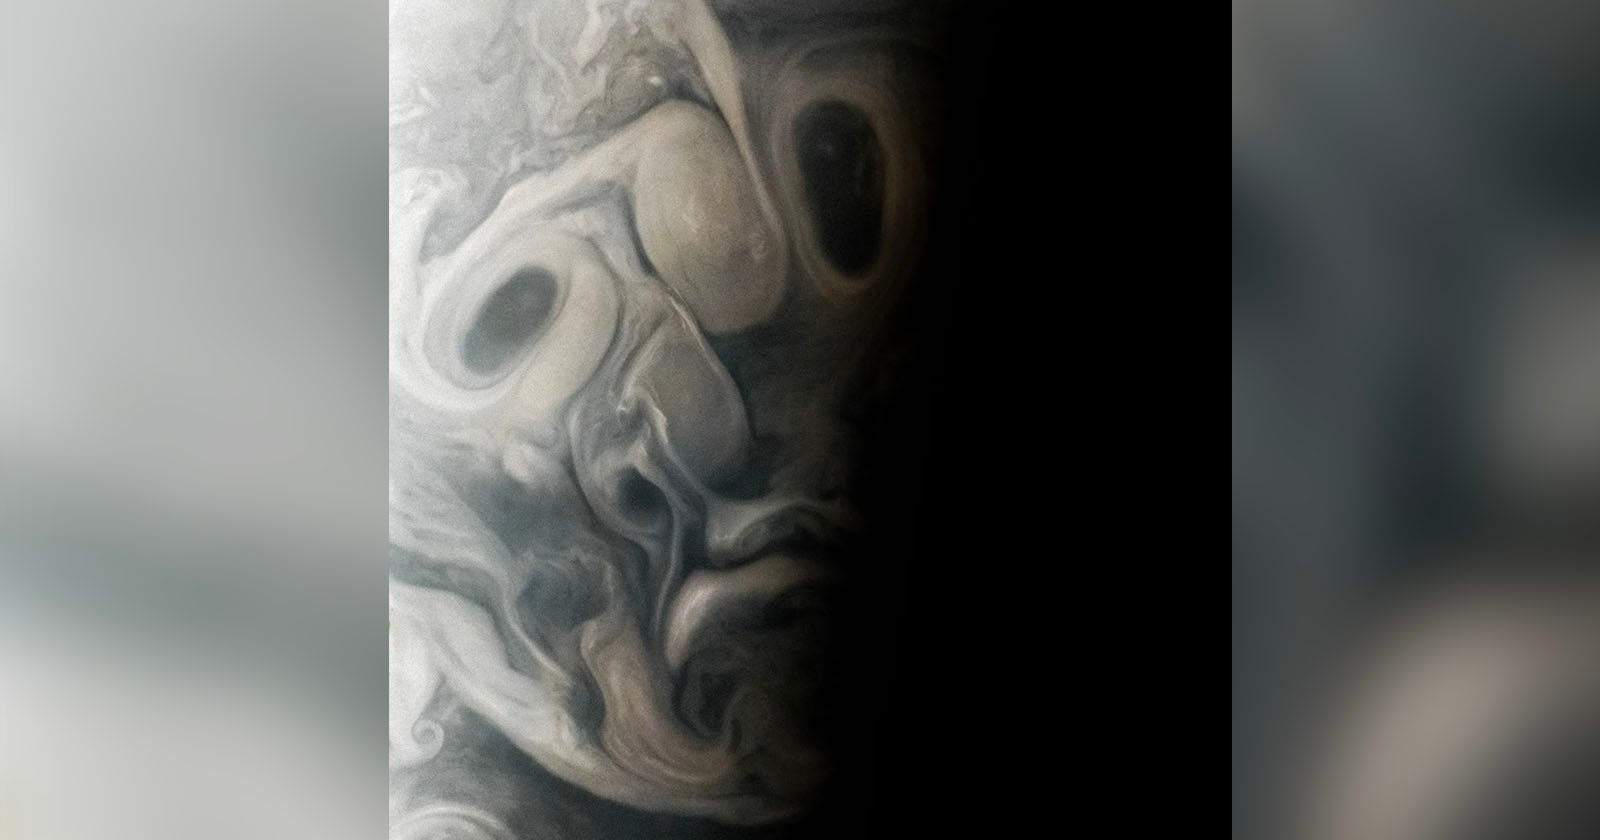  space probe captures creepy face looking out from 